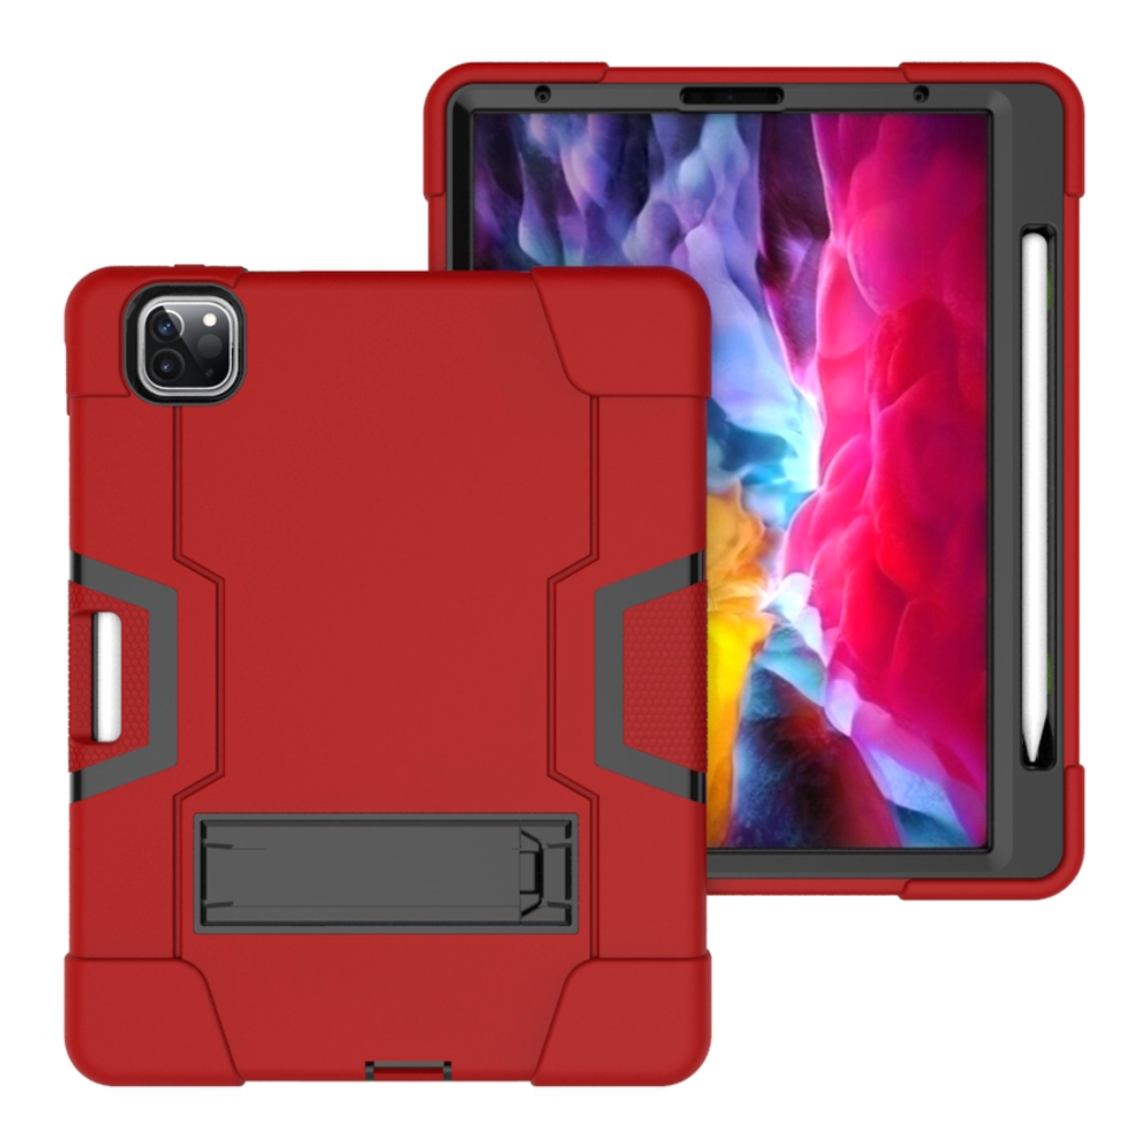 For Apple iPad Air4 10.9" / Pro 11" (2021) Hard Case Survivor with Stand - Red-Apple iPad Cases & Covers-First Help Tech